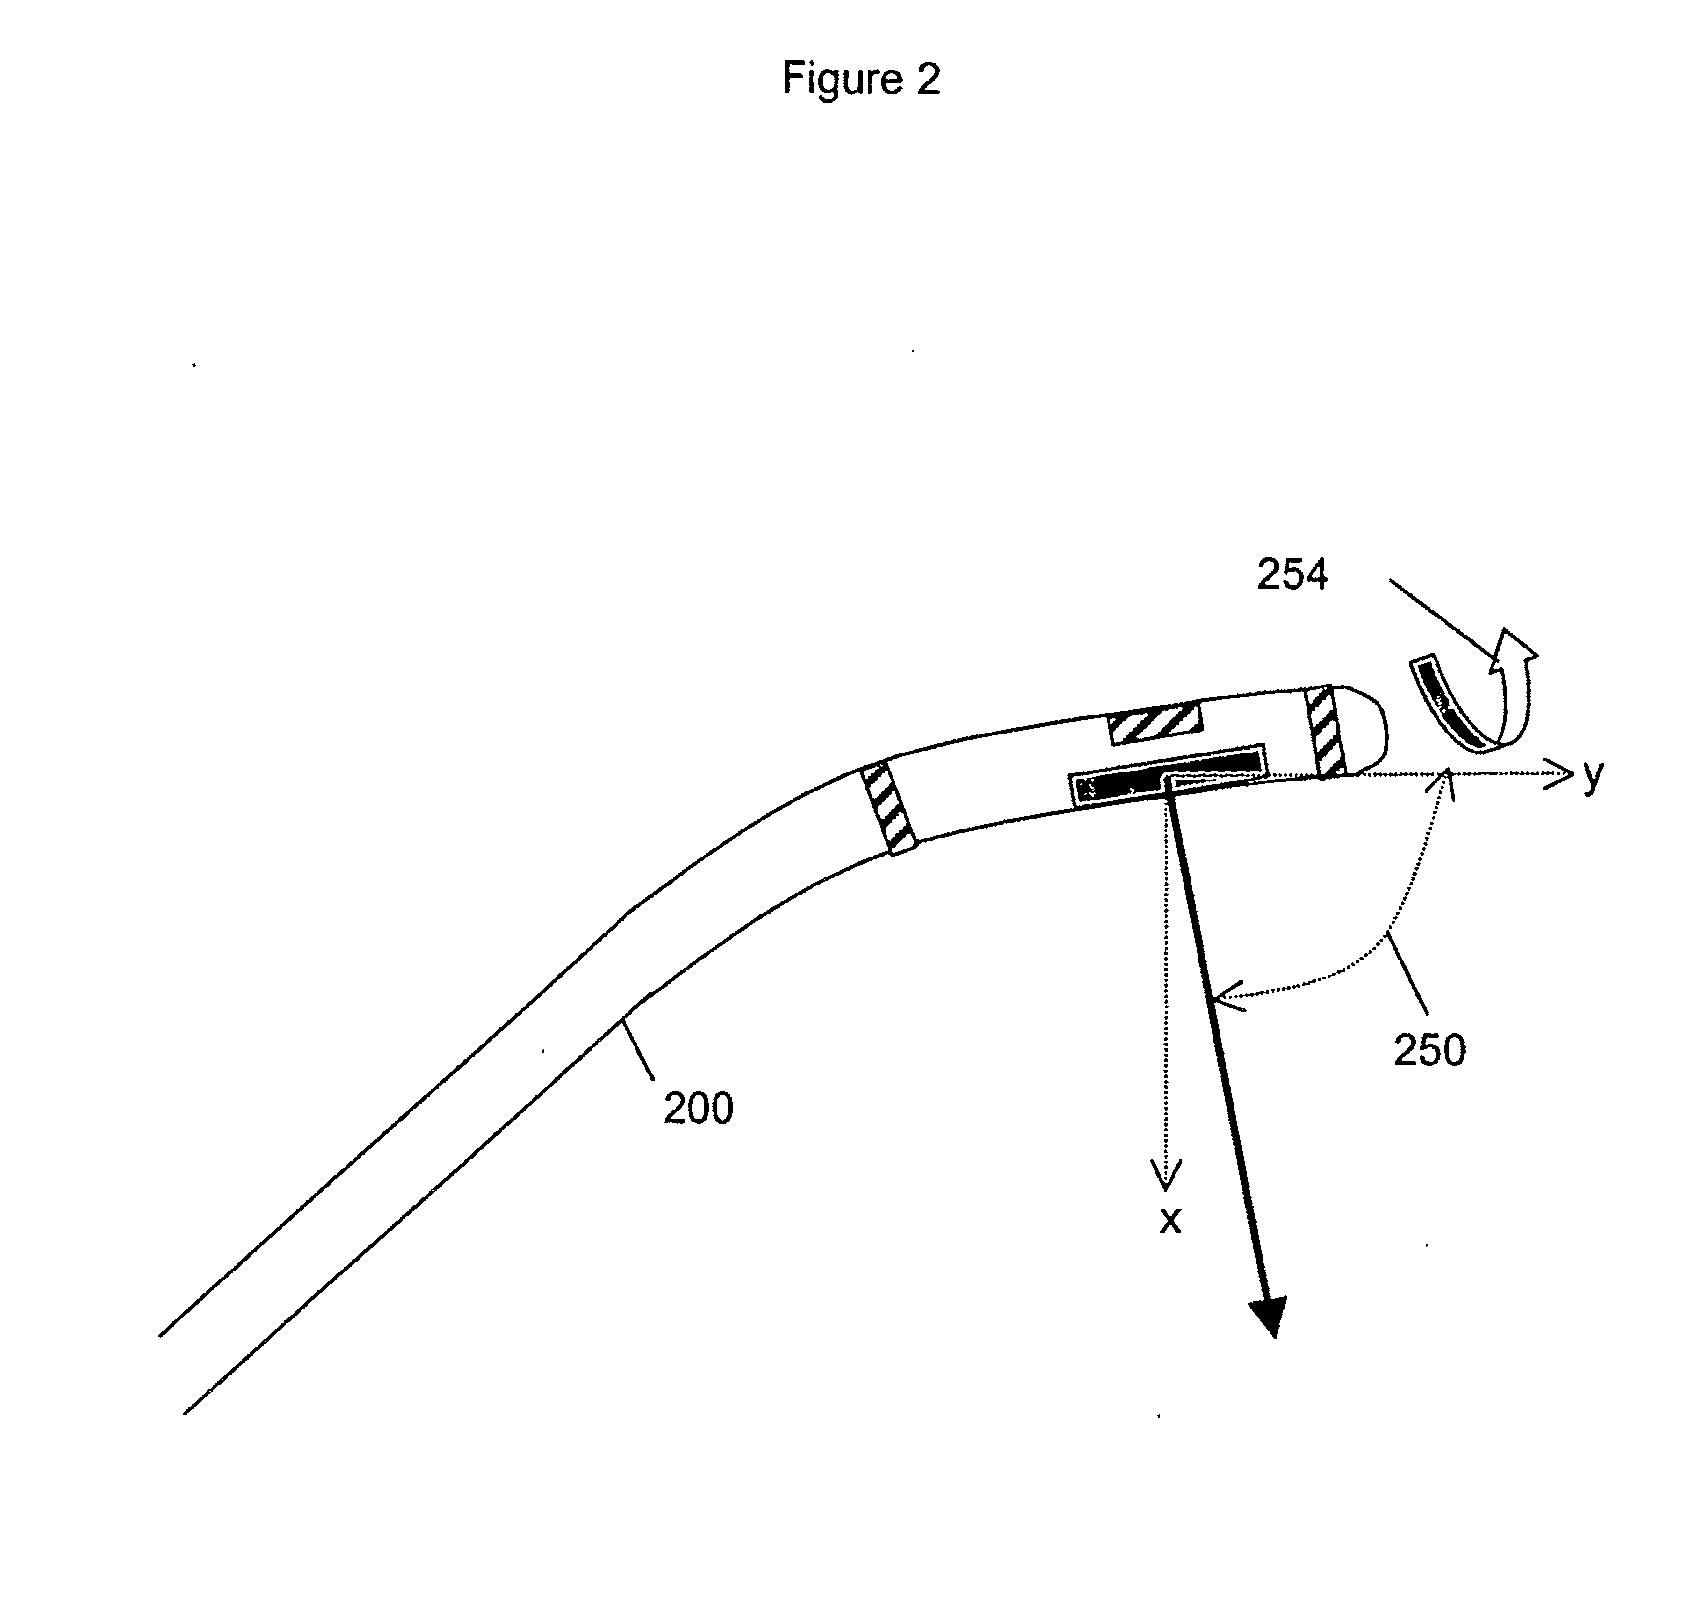 Method and apparatus for localizing an ultrasound catheter